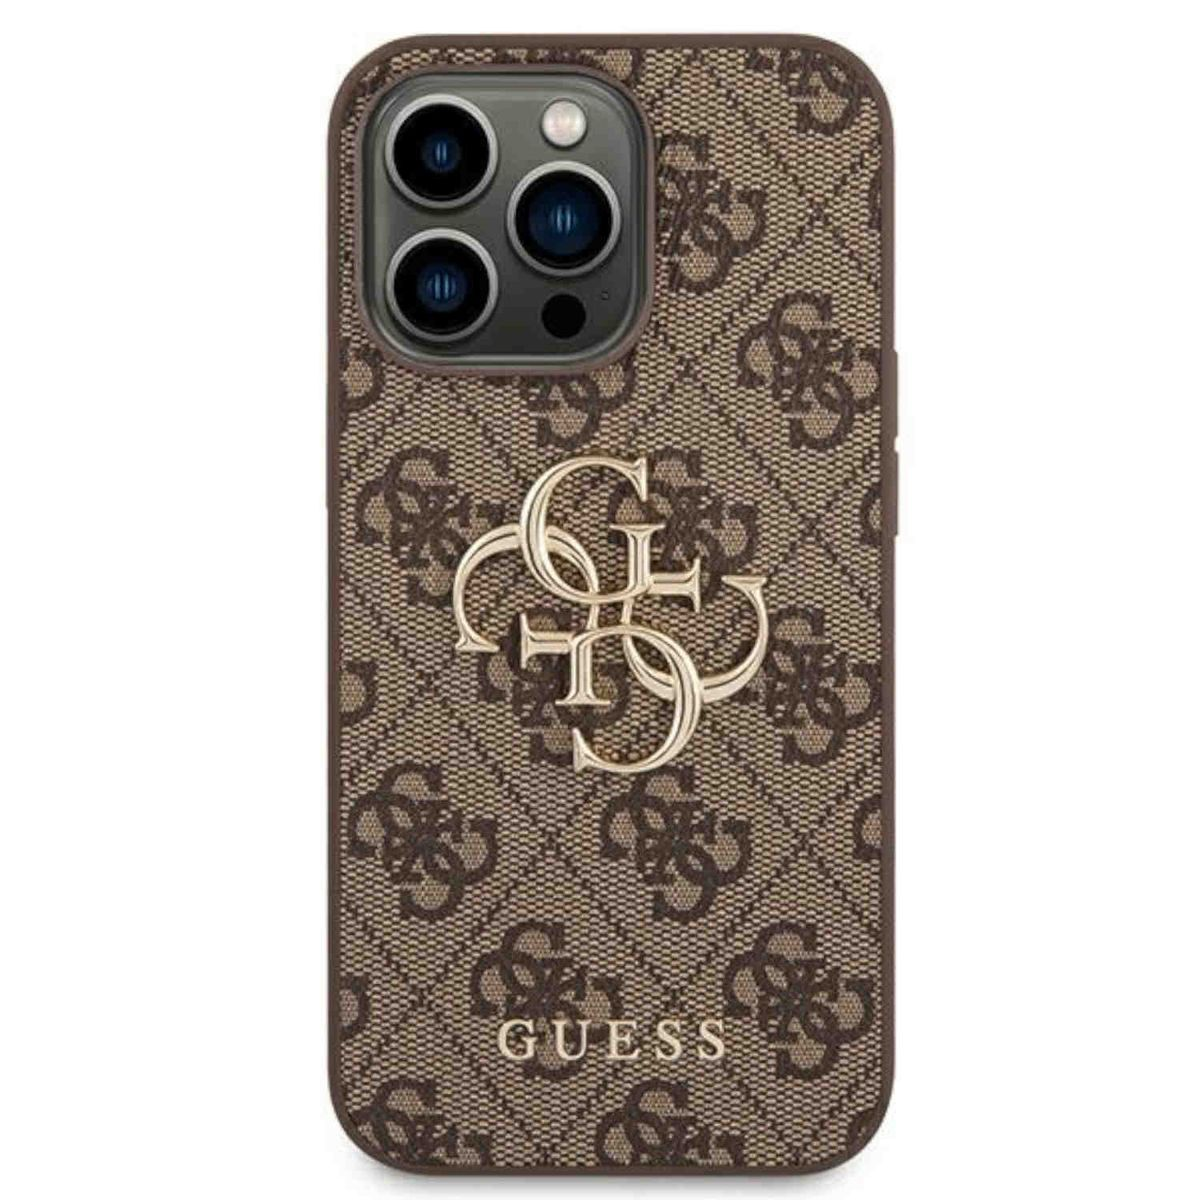 GUESS 4G Big Metal Logo Keine iPhone iPhone (Brown), 14 14 Backcover, Case Pro Apple, Angabe Pro